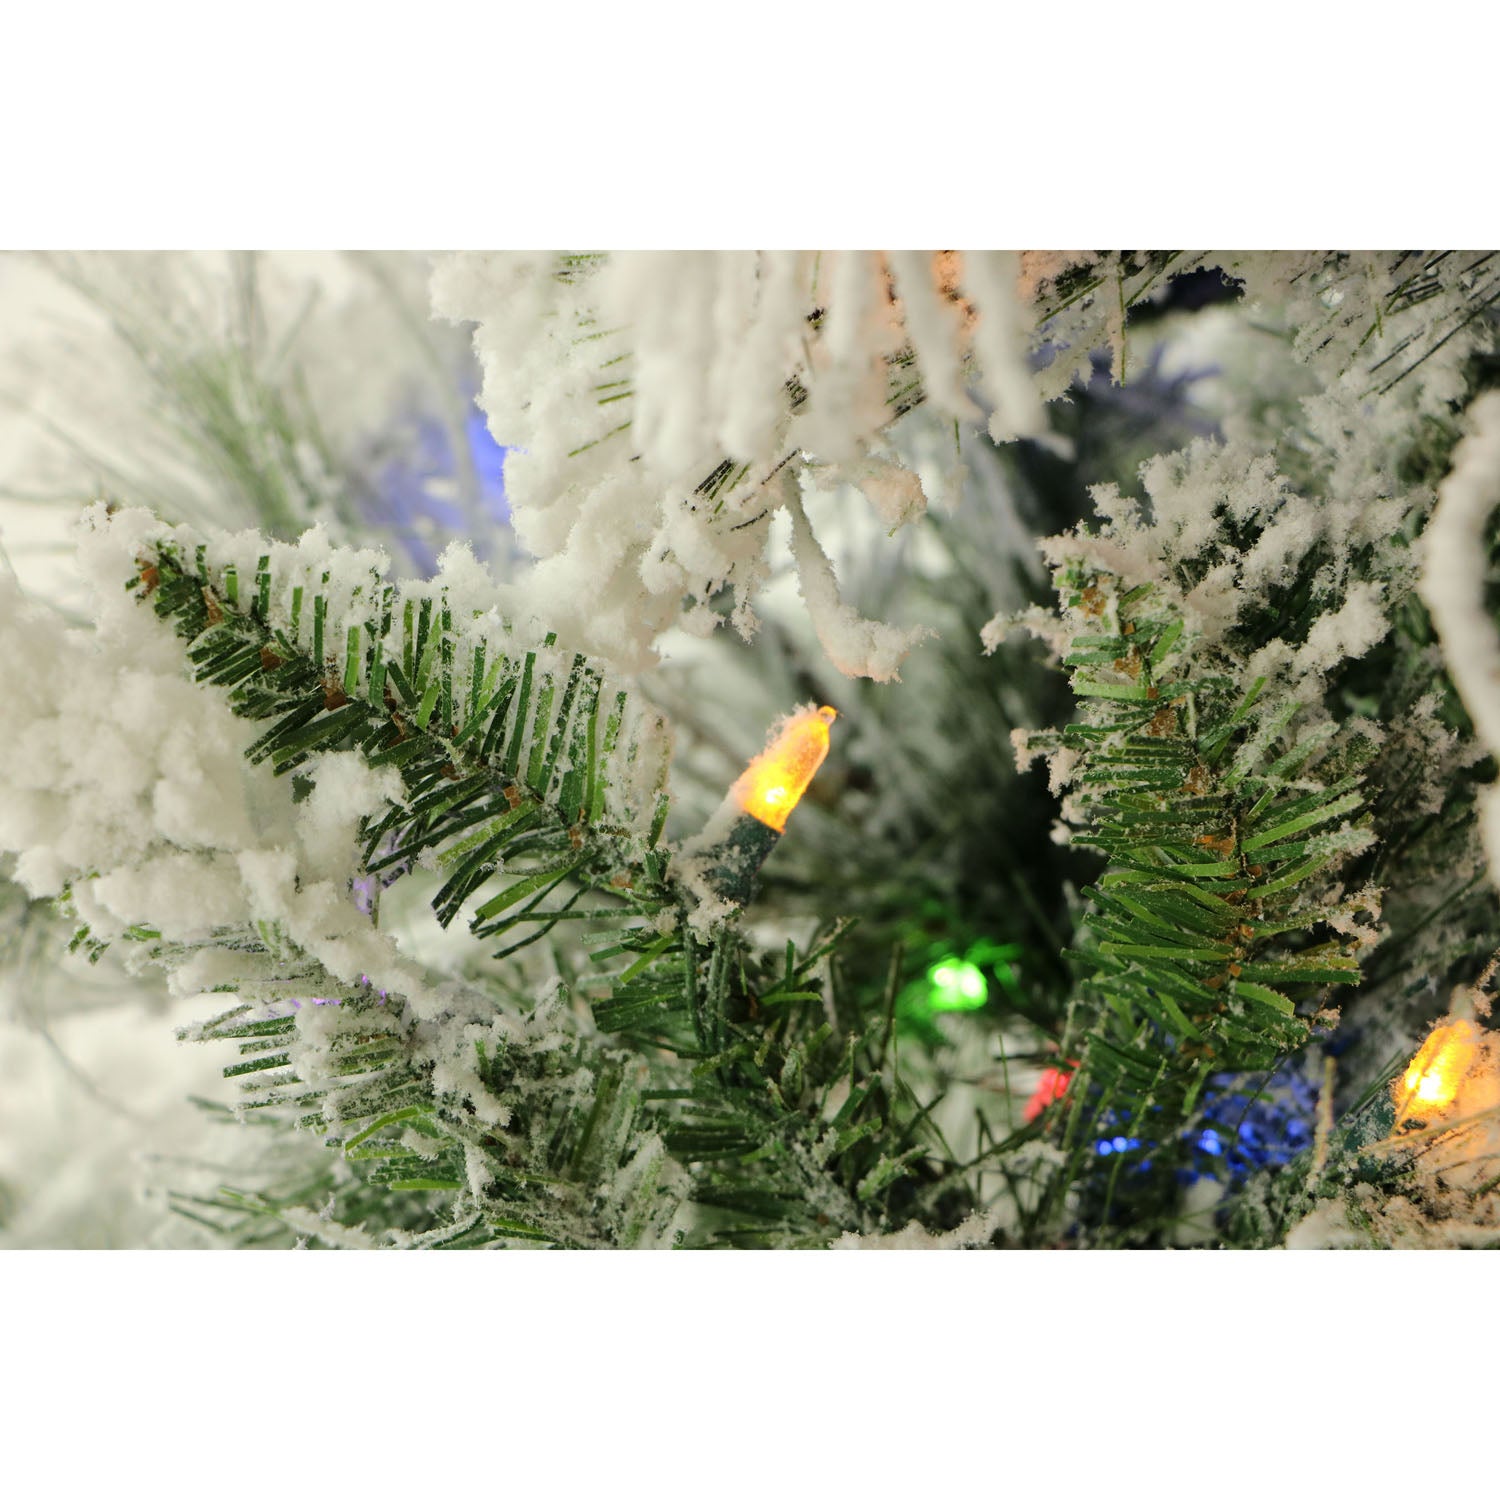 Fraser Hill Farm -  6.5-Ft. Flocked Snowy Pine Christmas Tree with Multi-Color LED String Lighting